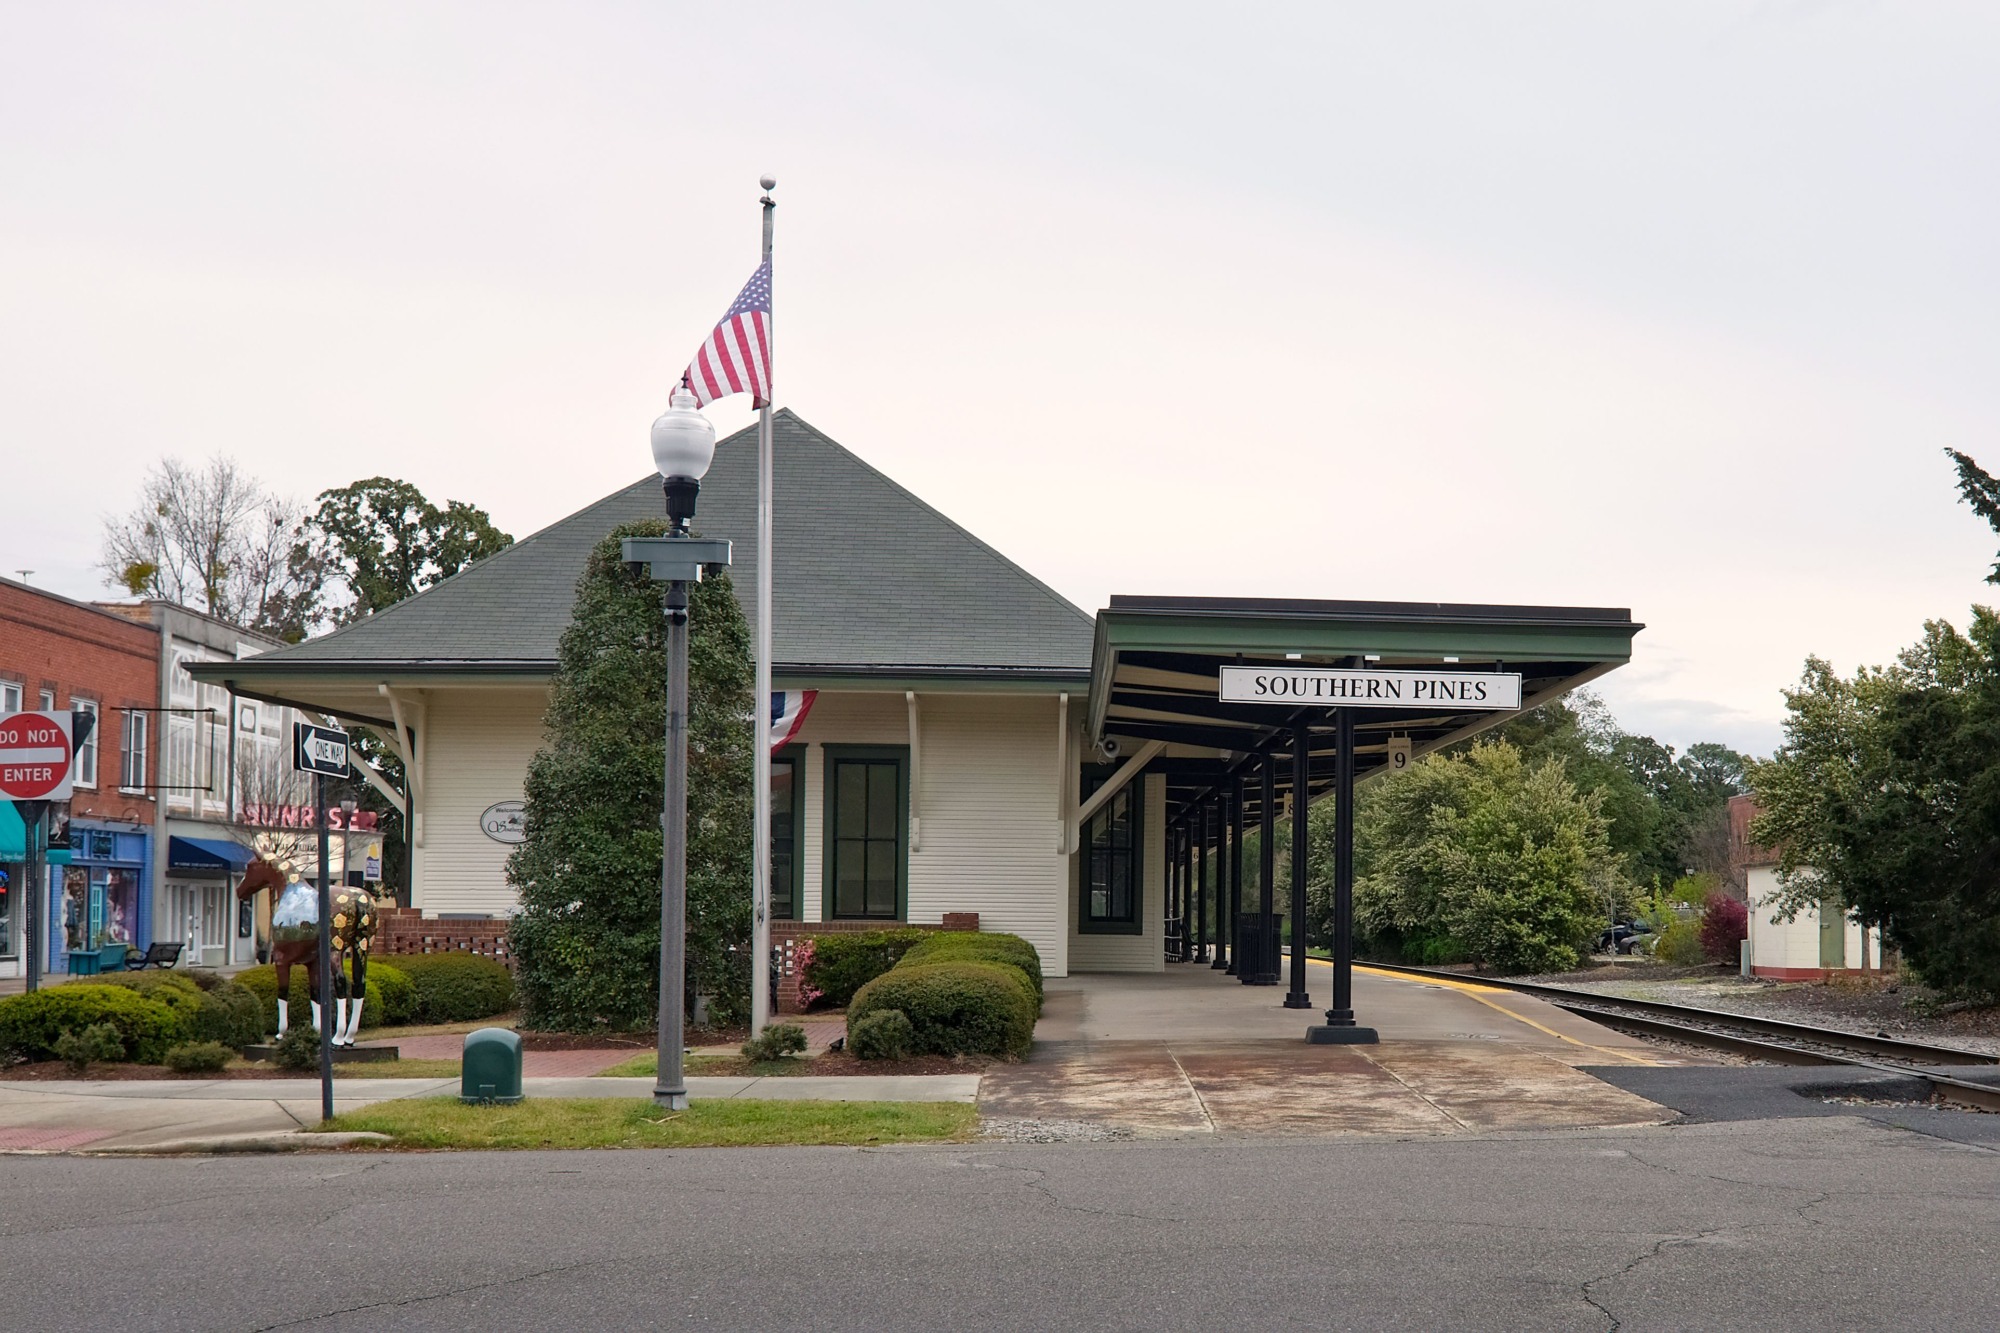 The train station in Southern Pines